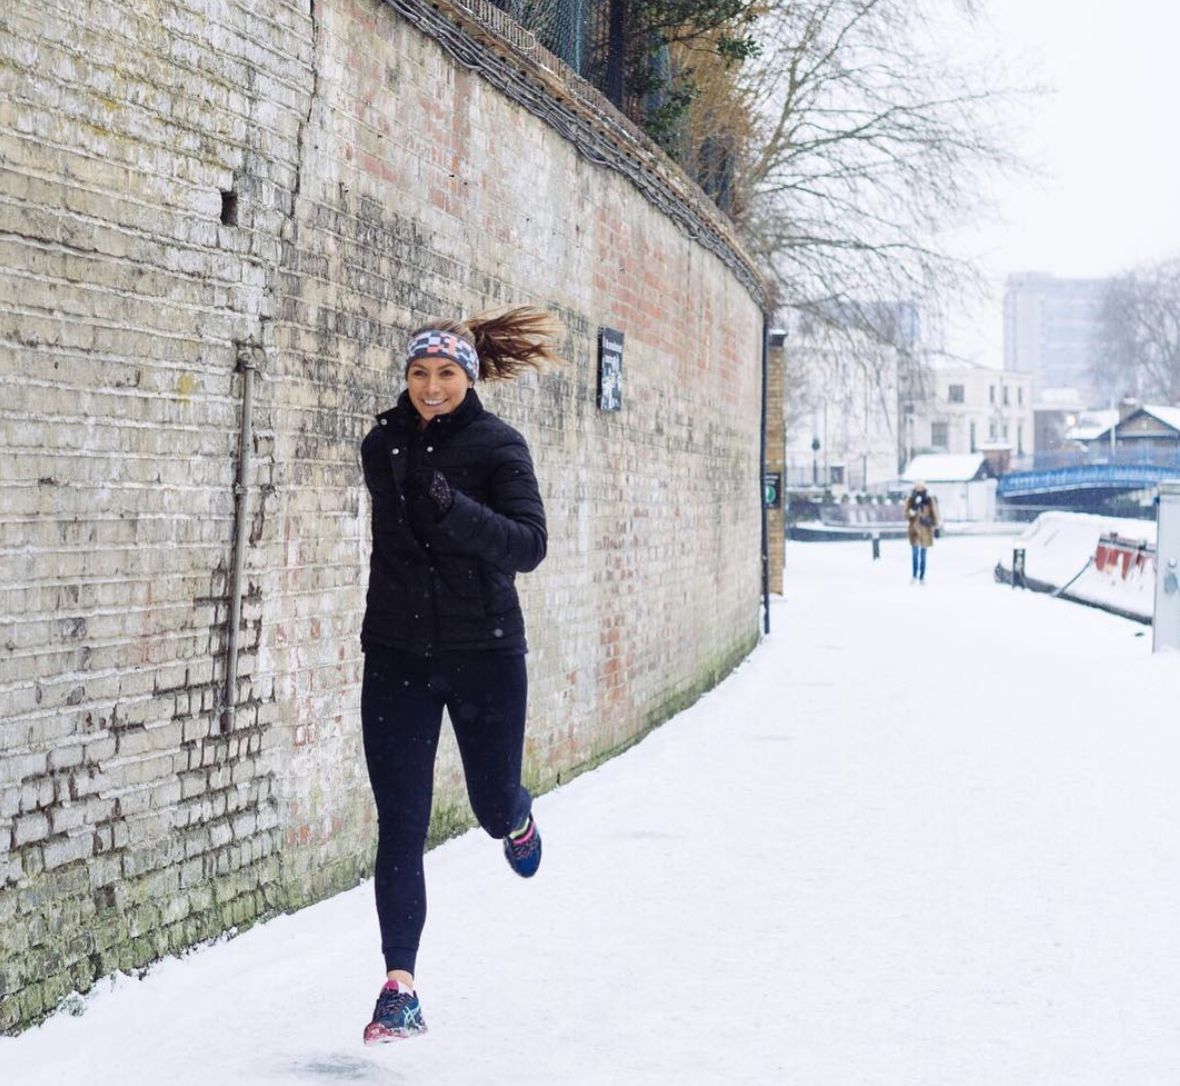 Best Winter Running Kit To Keep You 